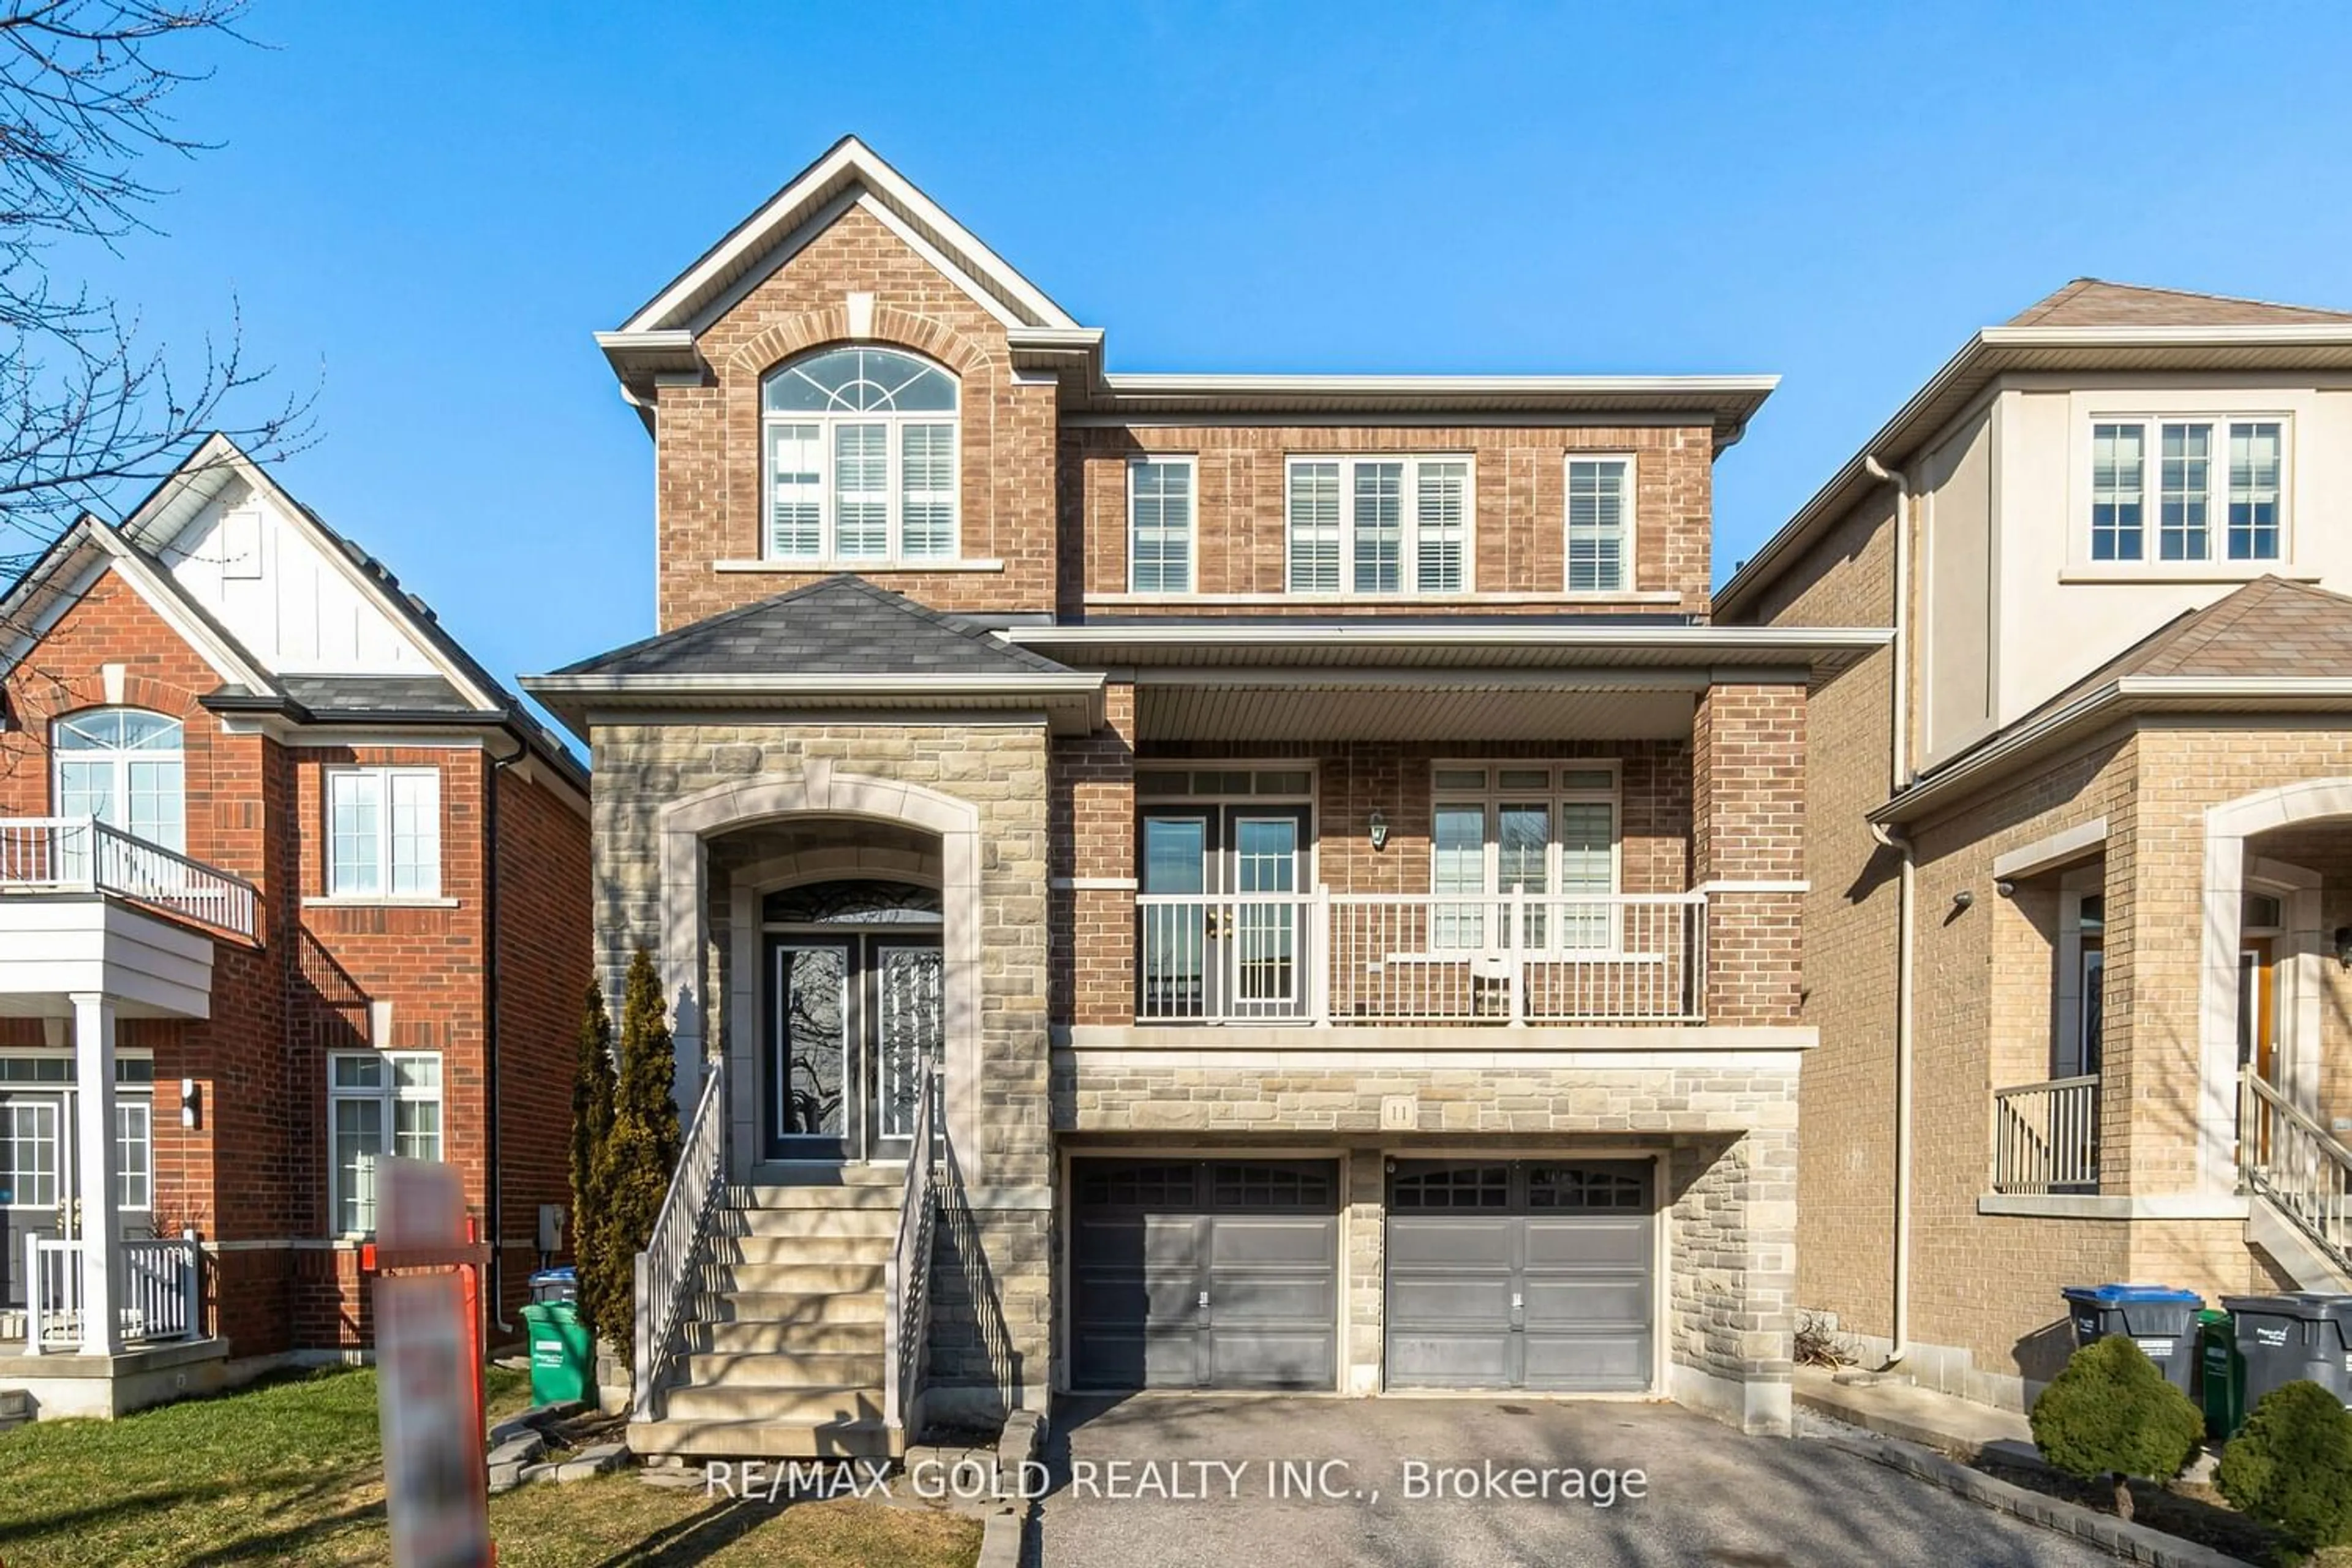 Home with brick exterior material for 11 Clearfield Dr, Brampton Ontario L6P 3L3